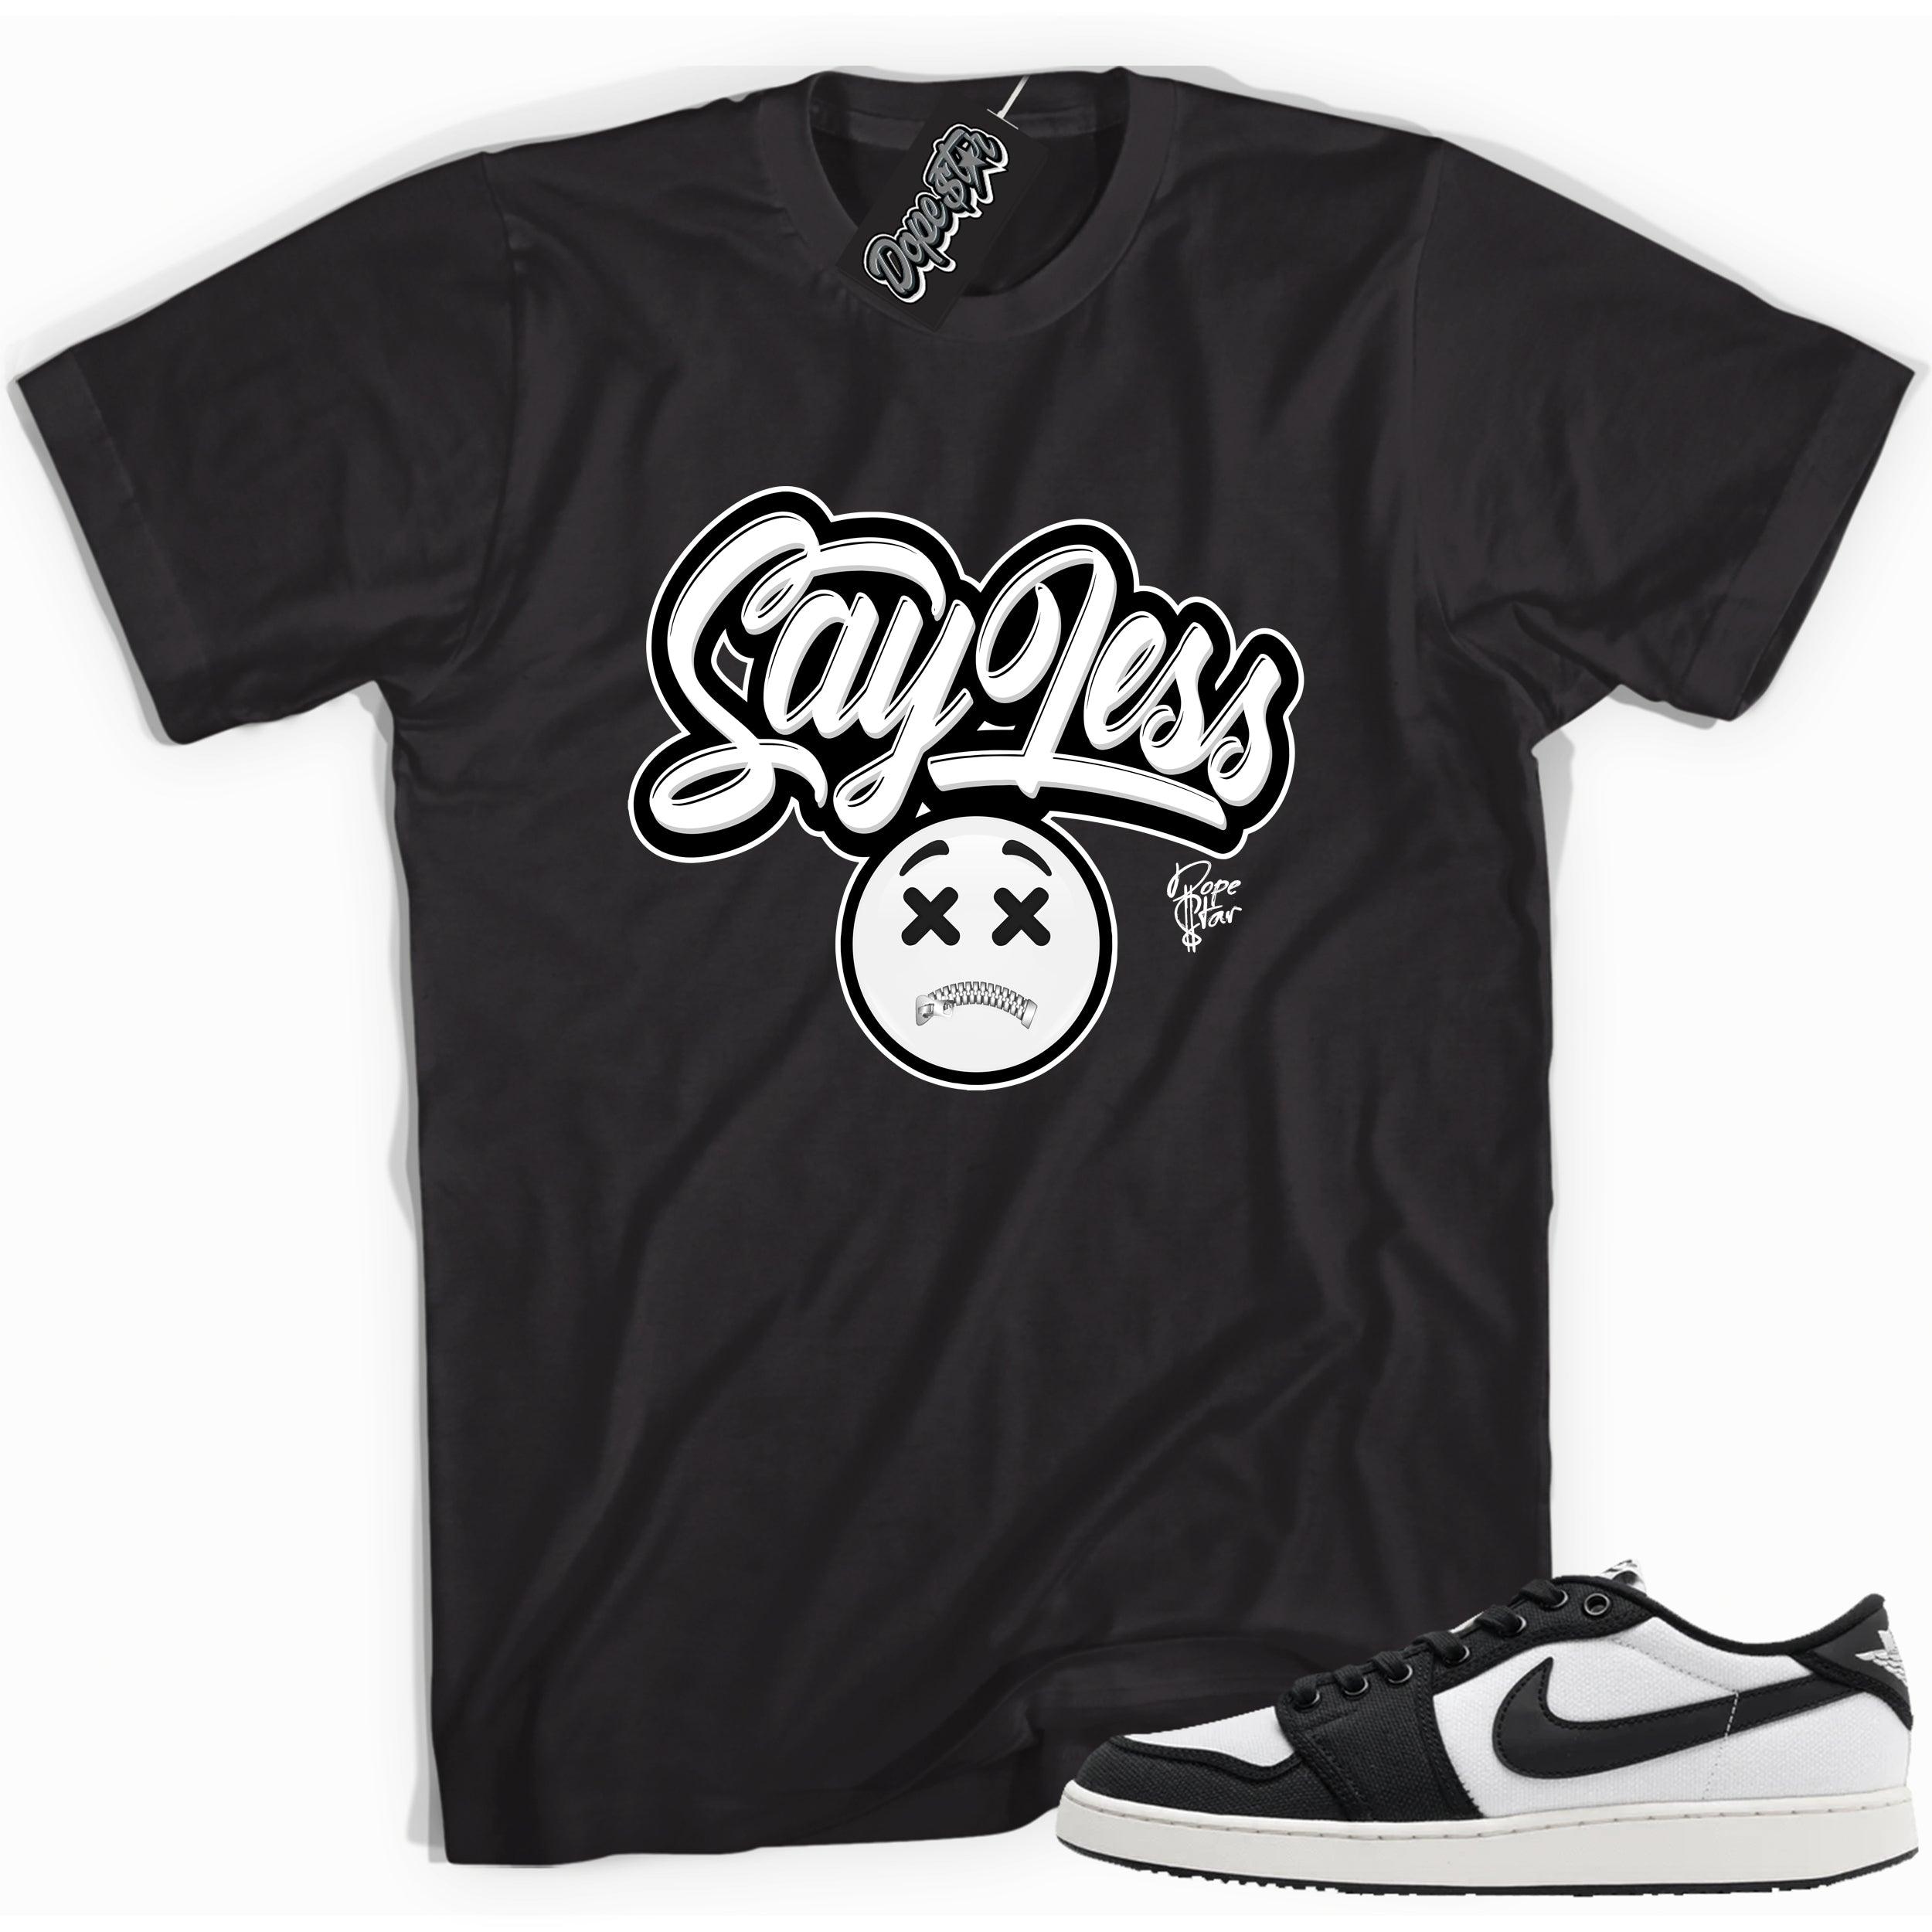 Cool black graphic tee with 'sayless' print, that perfectly matches Air Jordan 1 Retro Ajko Low Black & White sneakers.